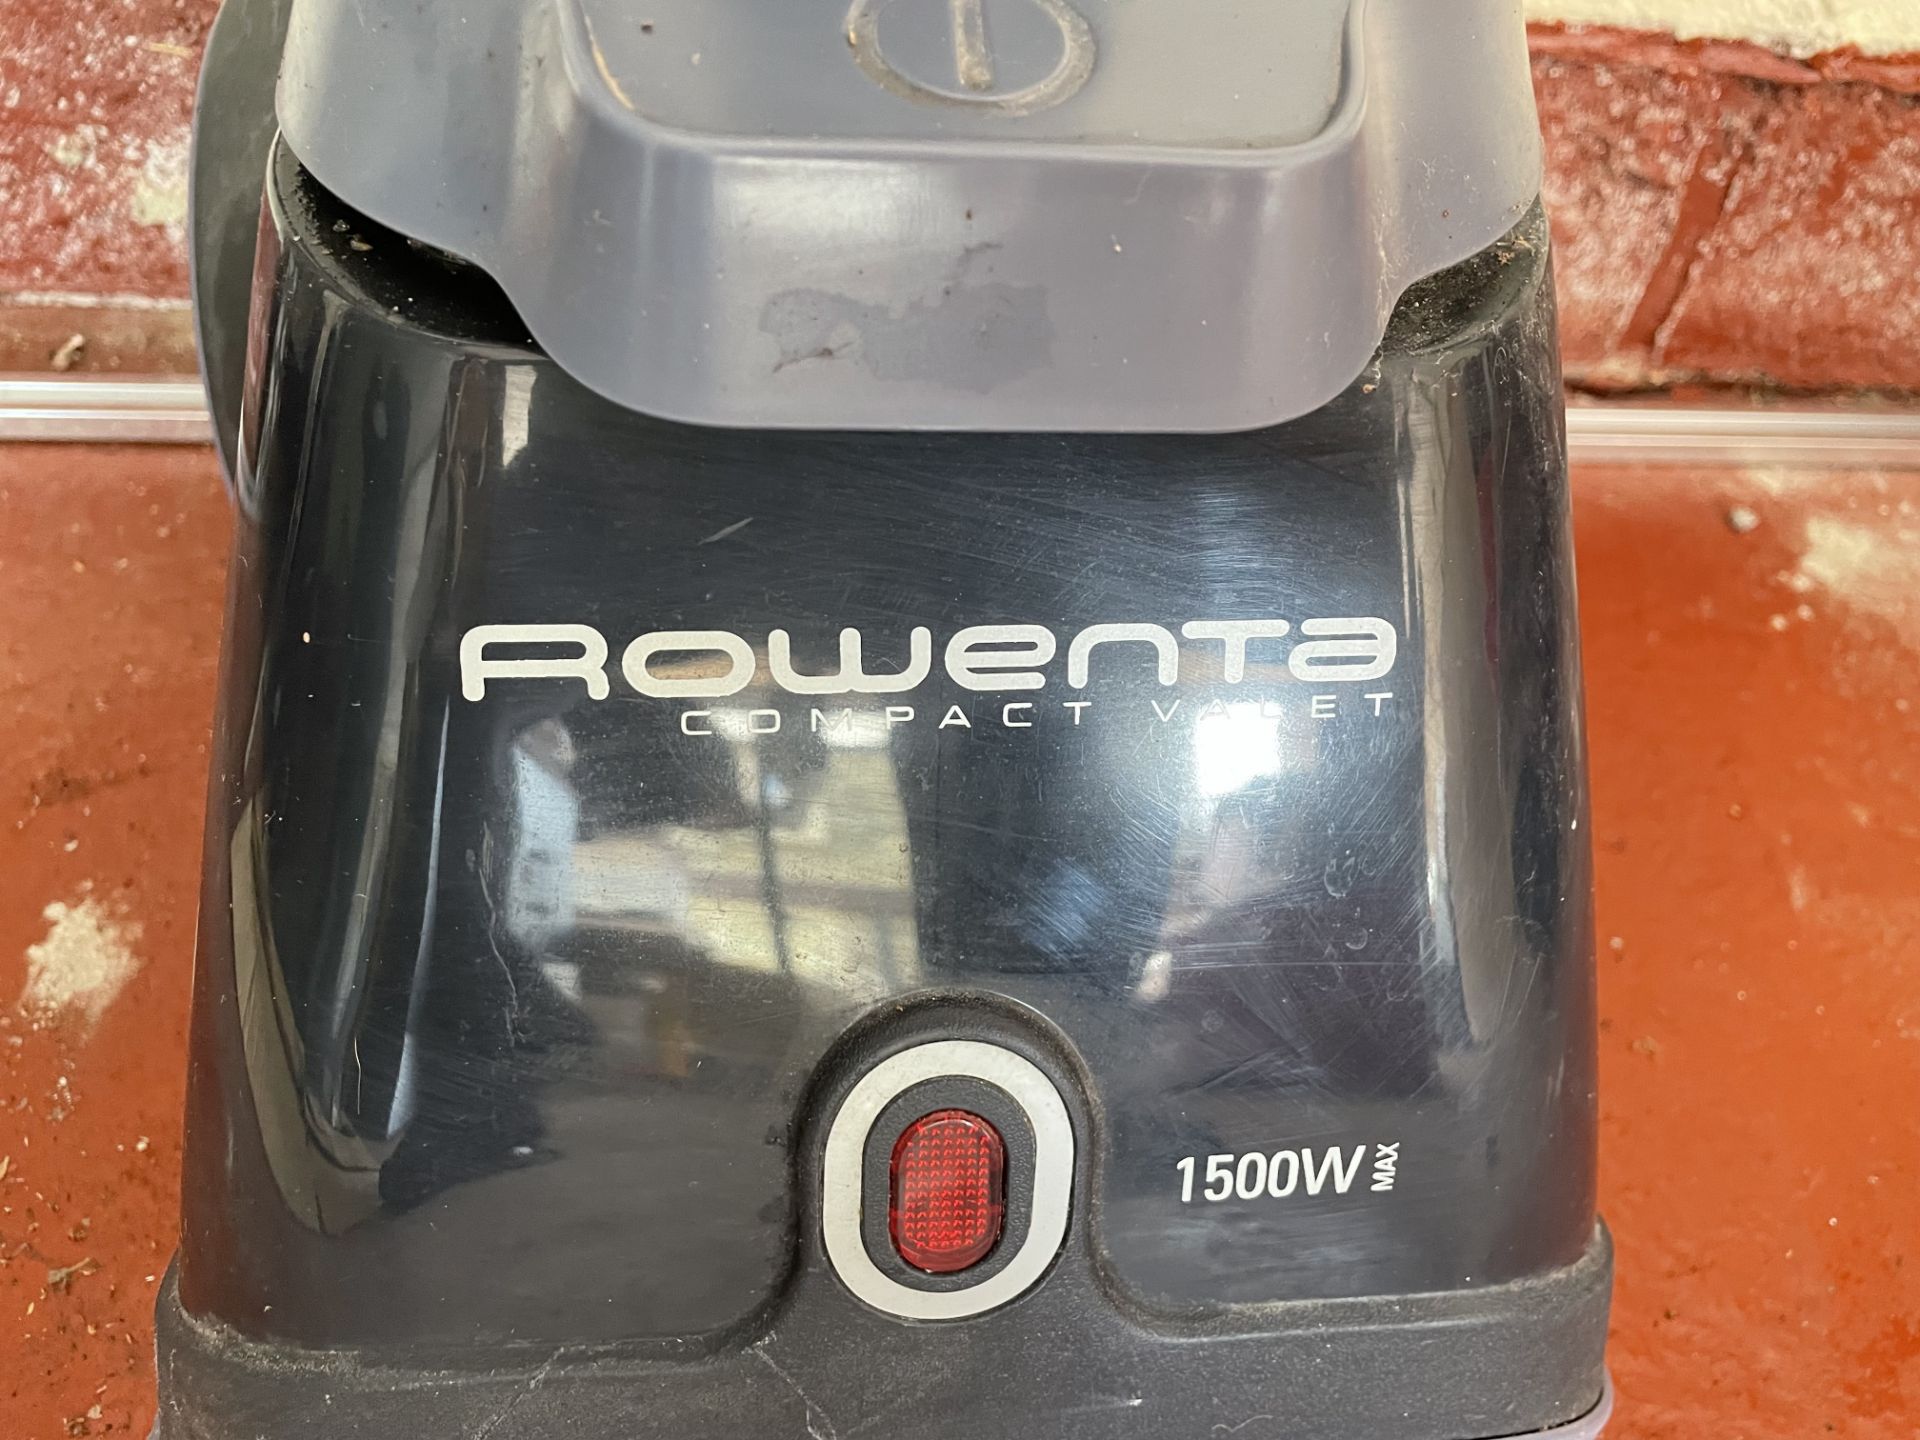 ROWENA COMPACT VALET CLOTHES STEAMER 1500w - Image 3 of 3